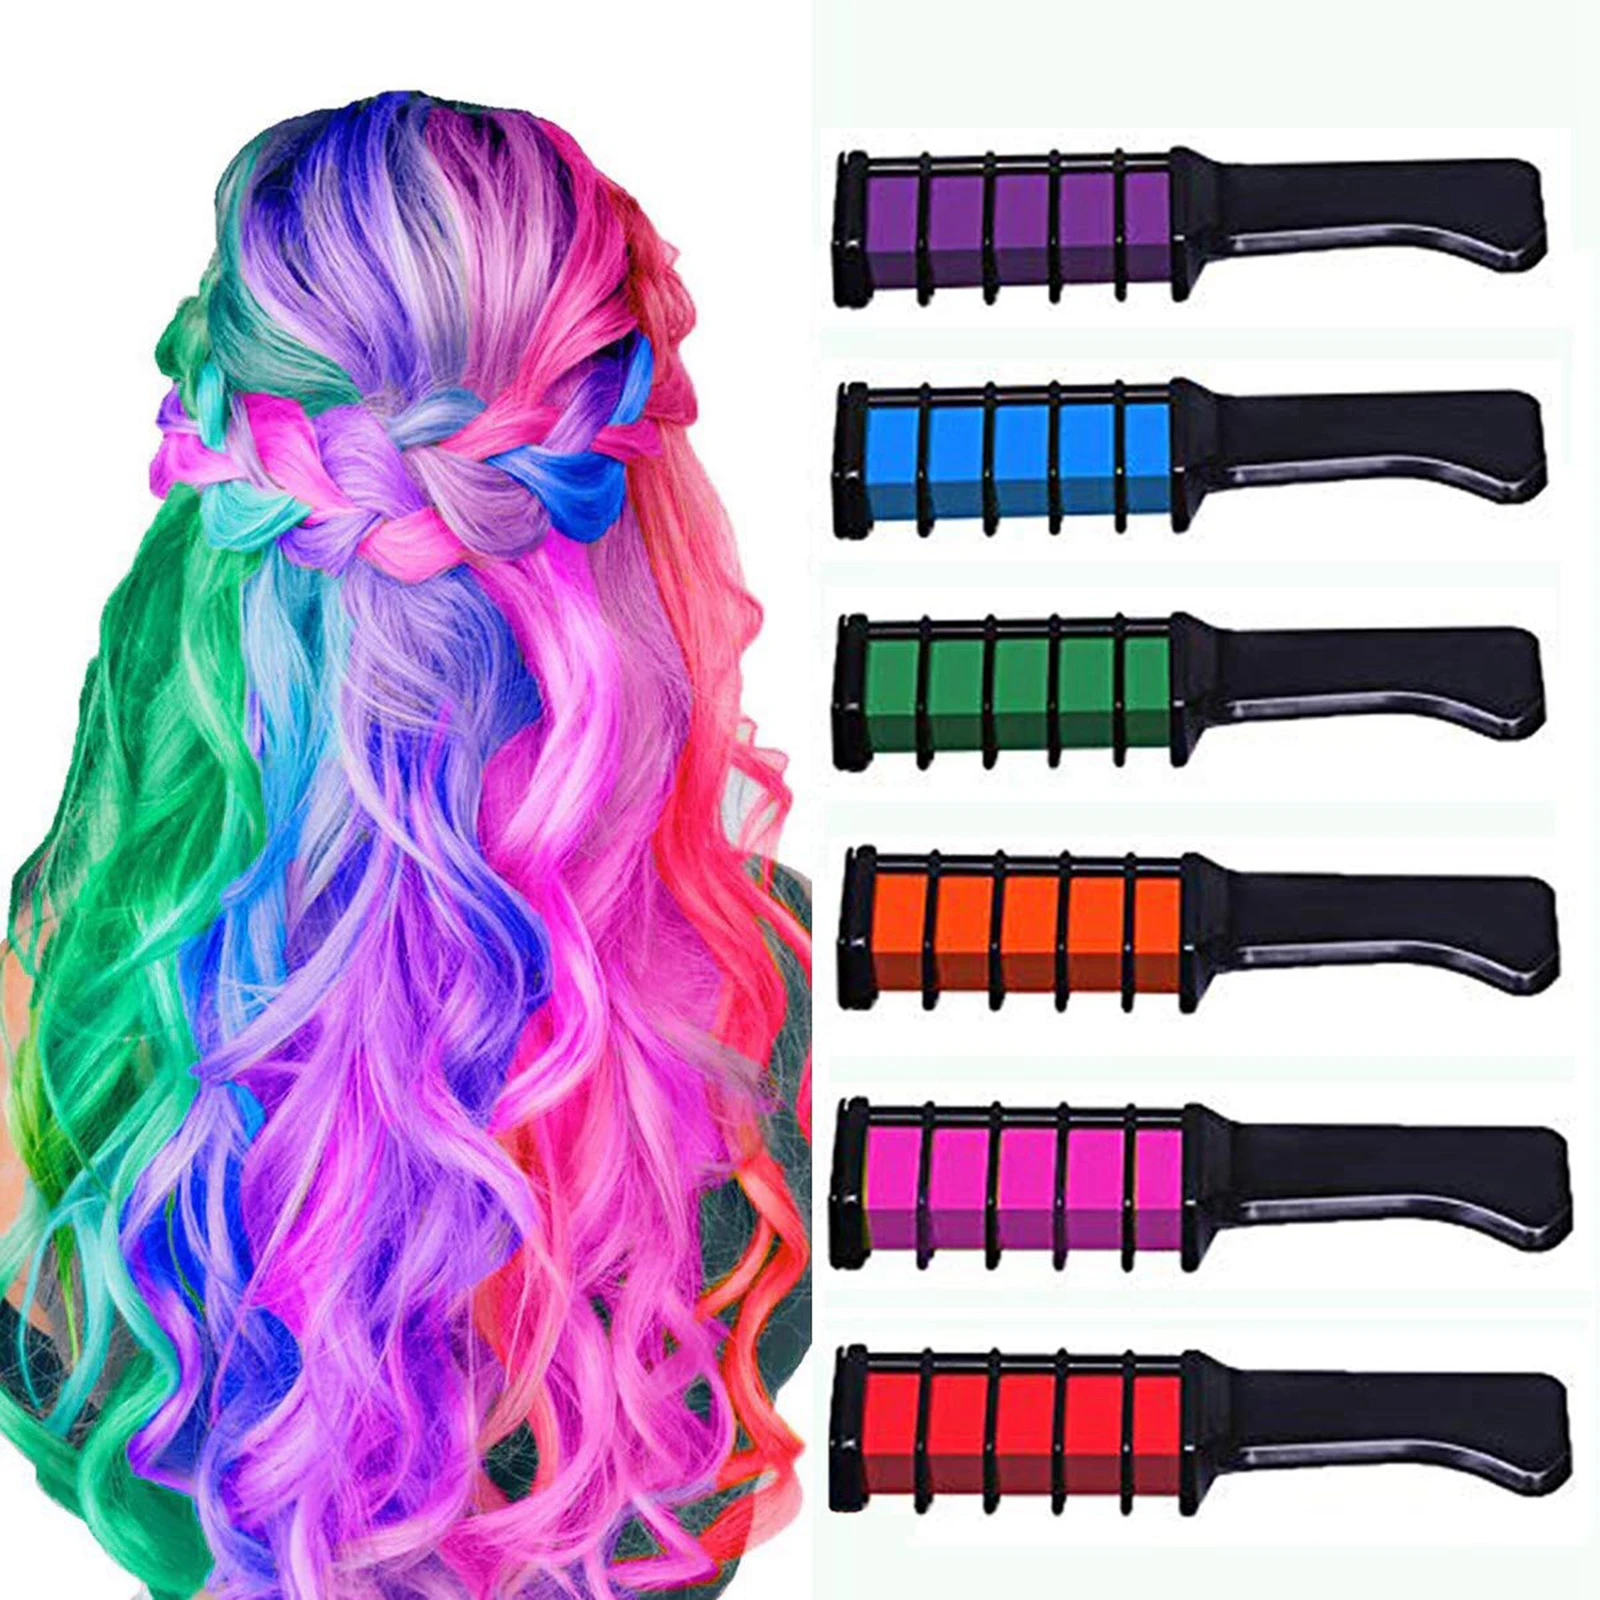 6PCS Hair Chalk Comb Hair Color Cream for Girls Kids Gifts Temporary Bright Washable Mascara hair color crayons Dyeing Comb